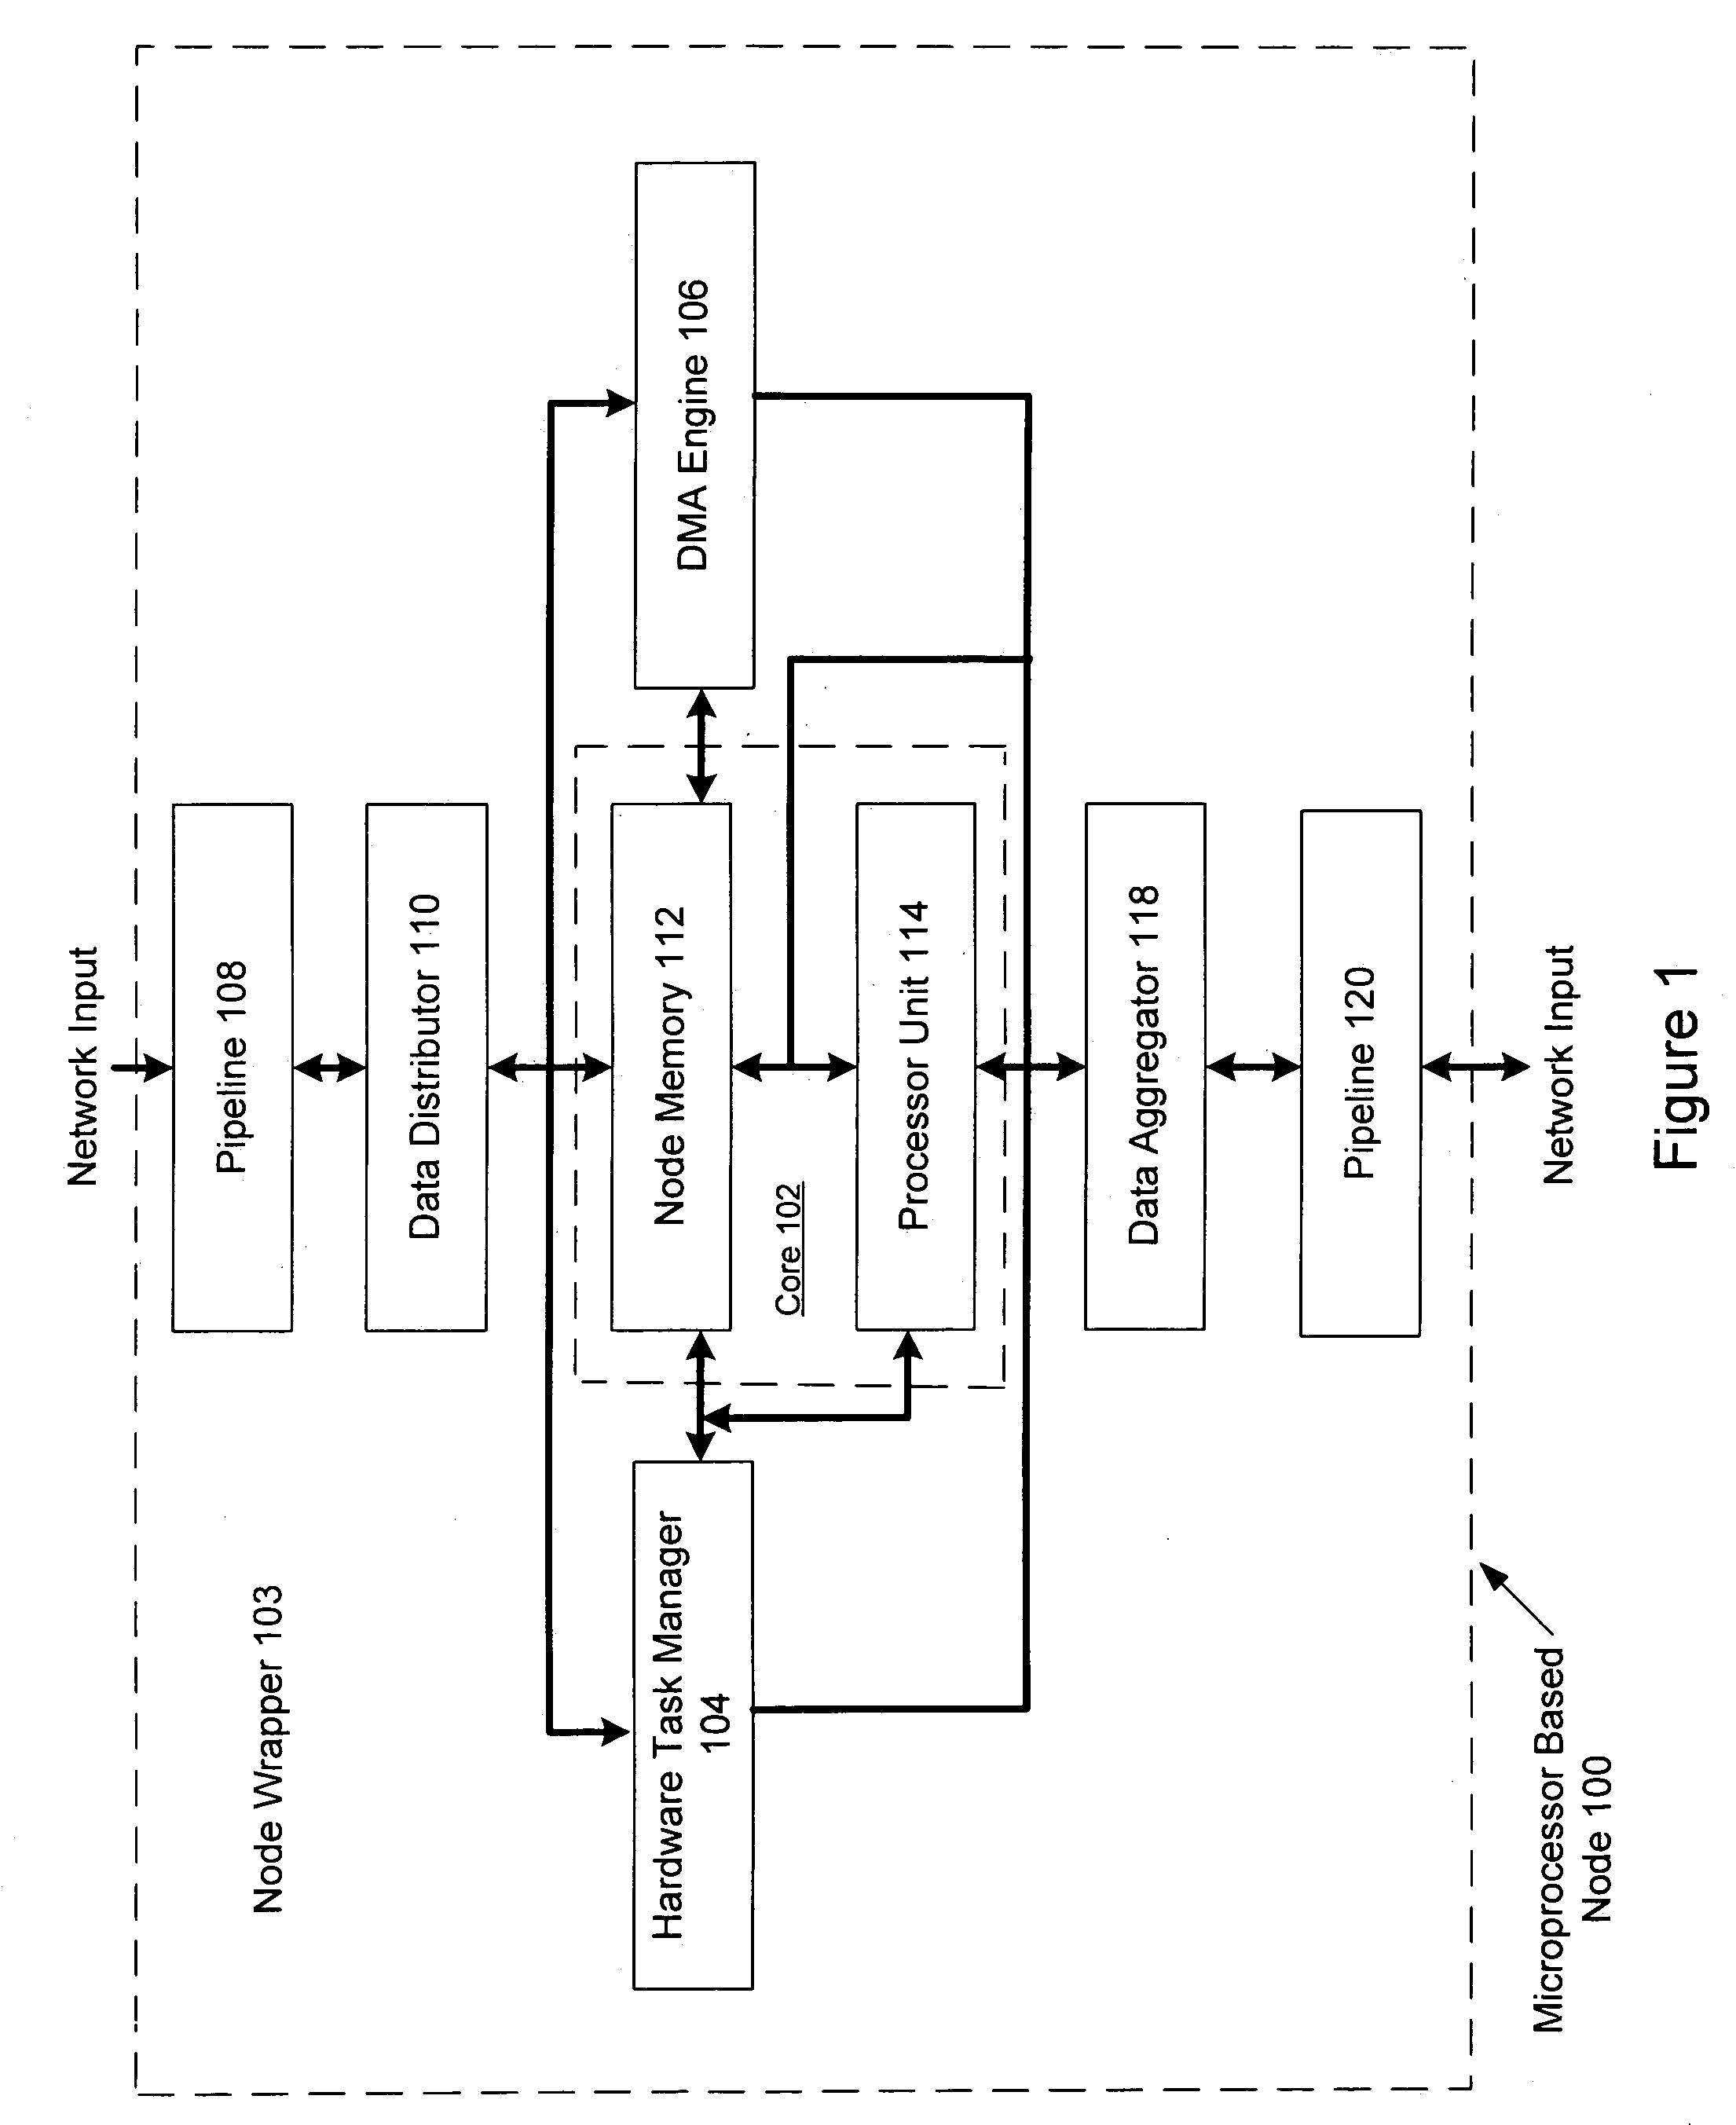 System and method using embedded microprocessor as a node in an adaptable computing machine